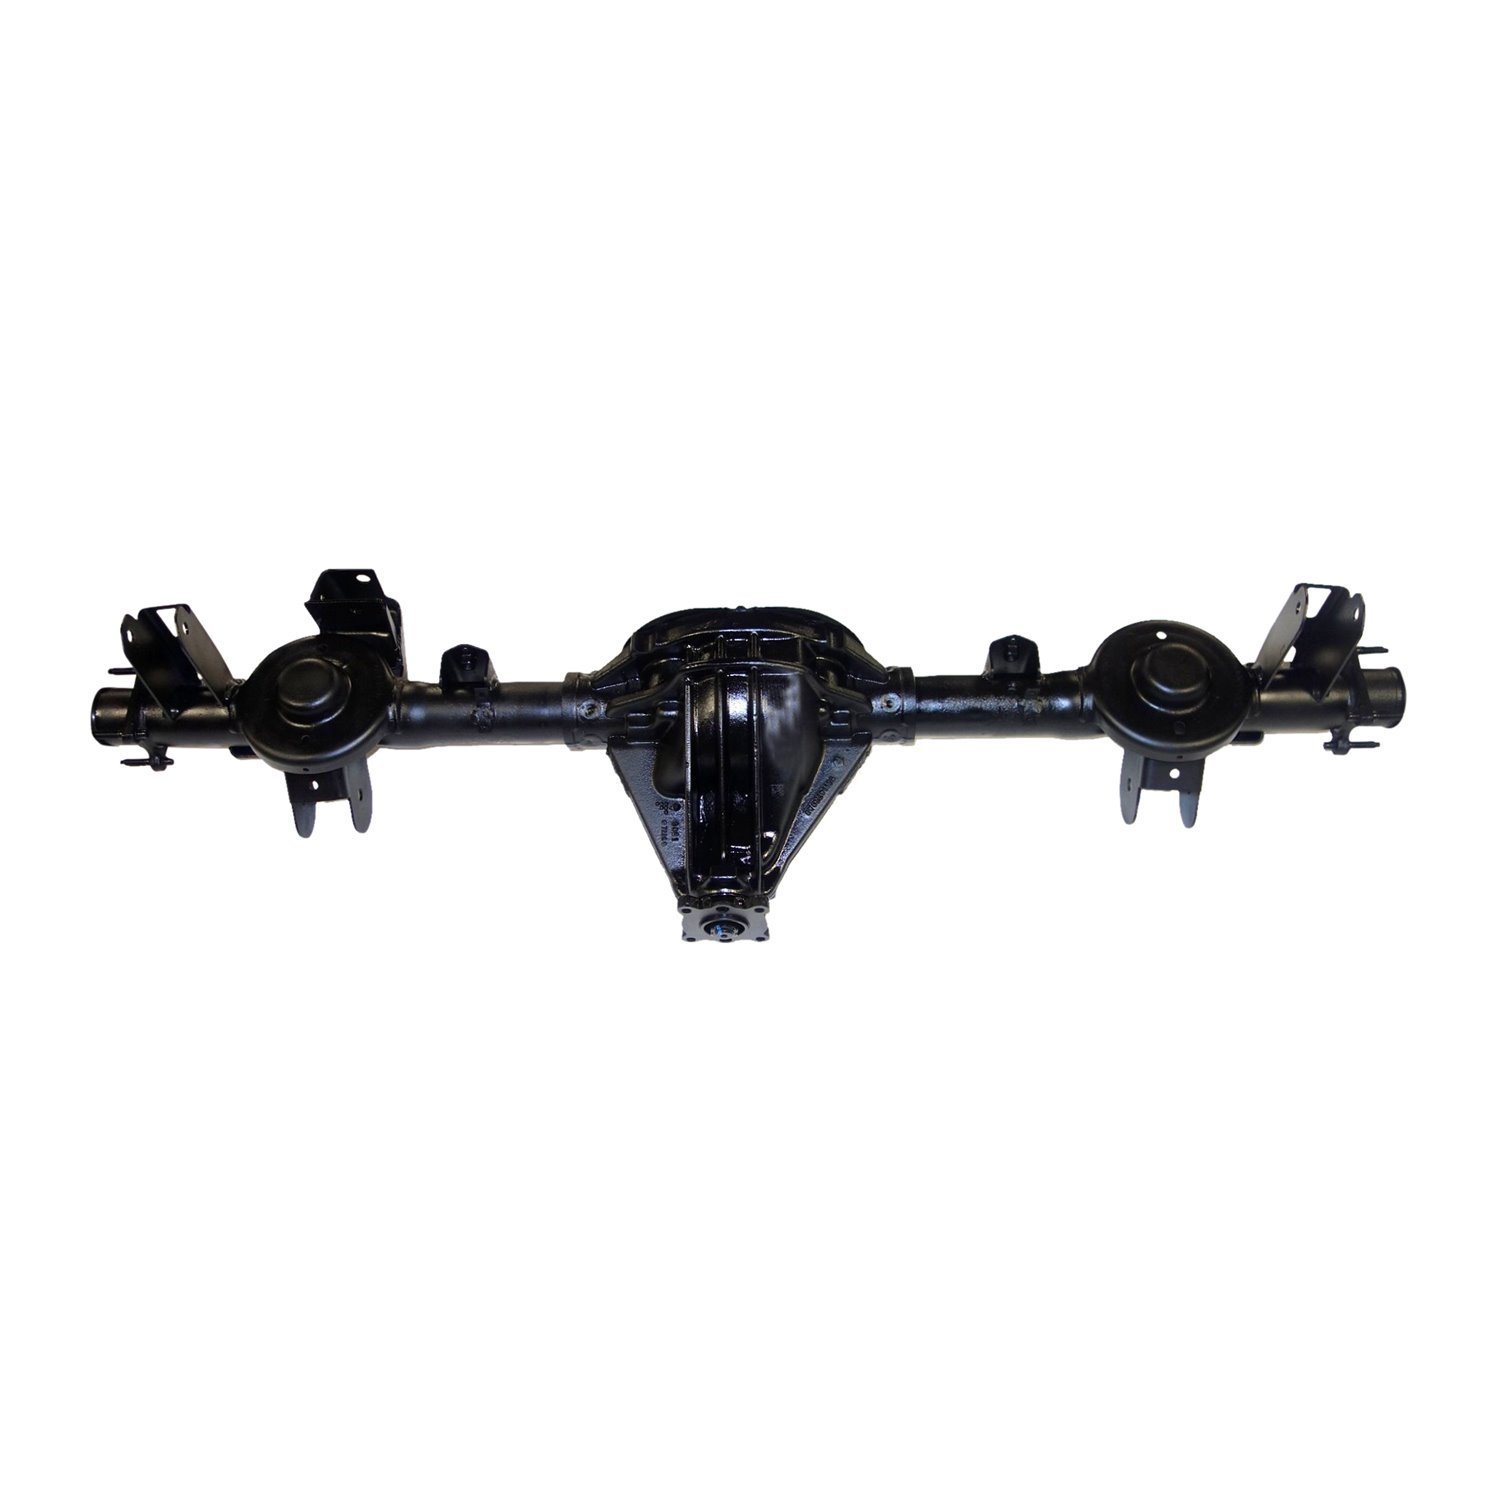 Remanufactured Axle Assembly for Chy 8.25" 07-10 Jeep Liberty 3.55 Ratio, Open